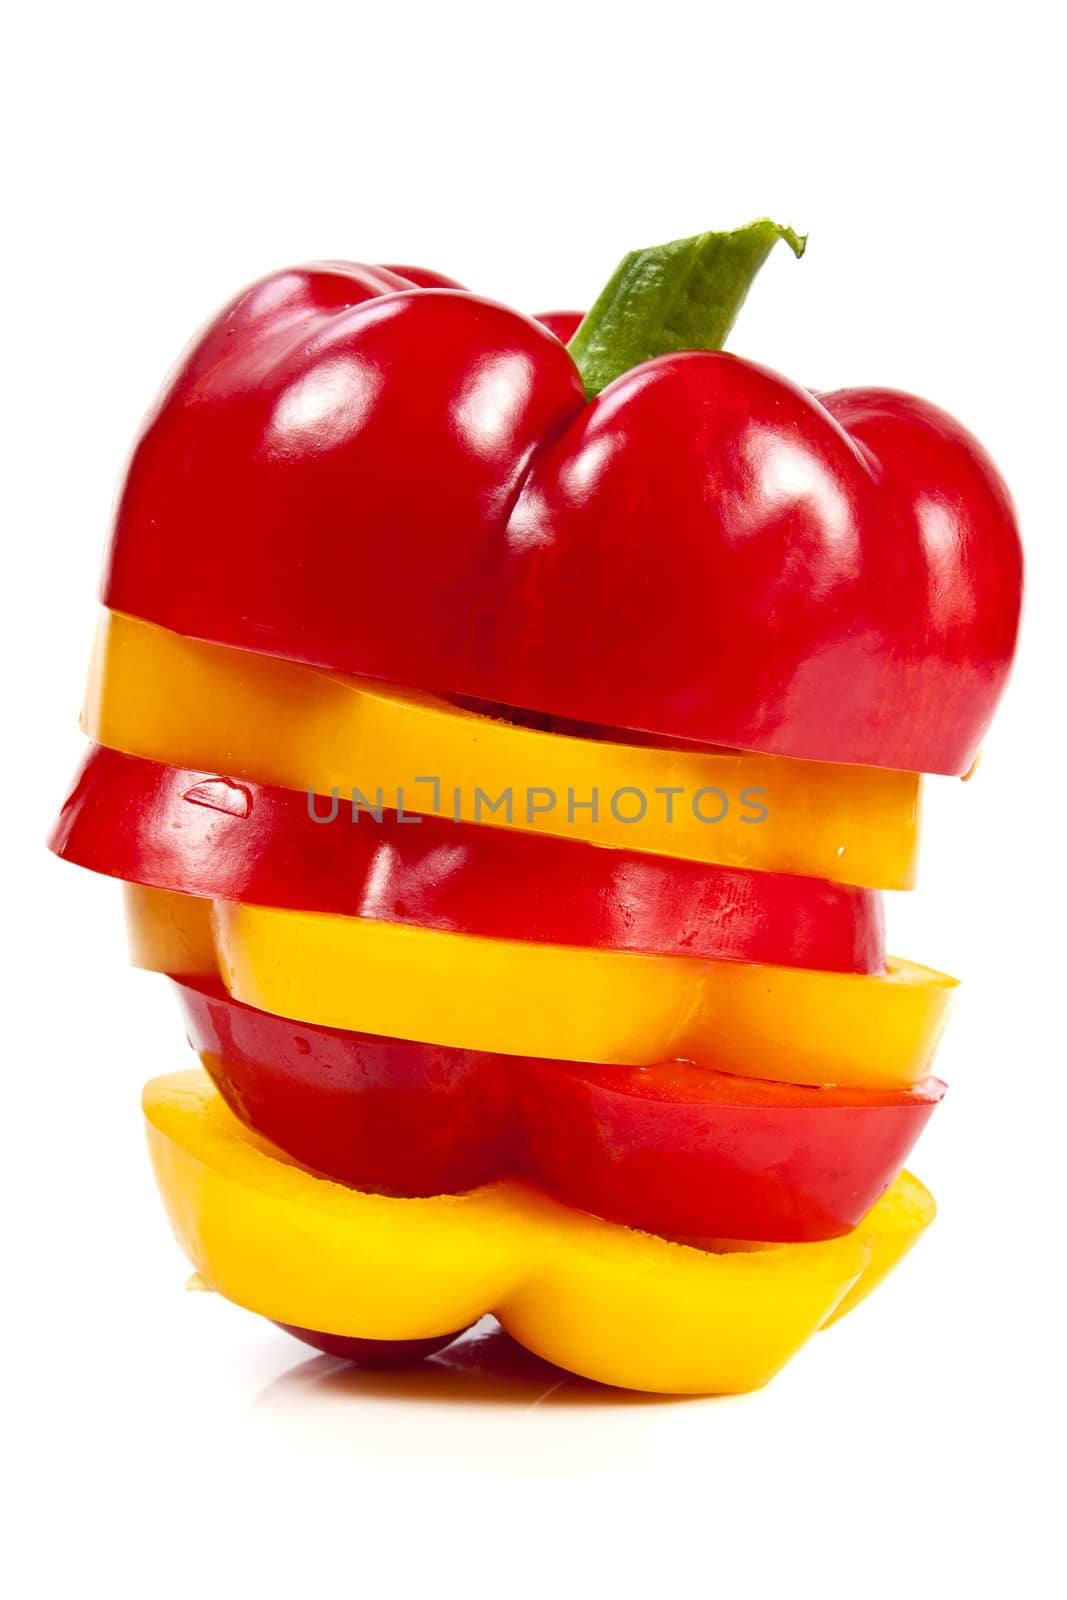 Slices of red and yellow sweet peppers stacked together on a white